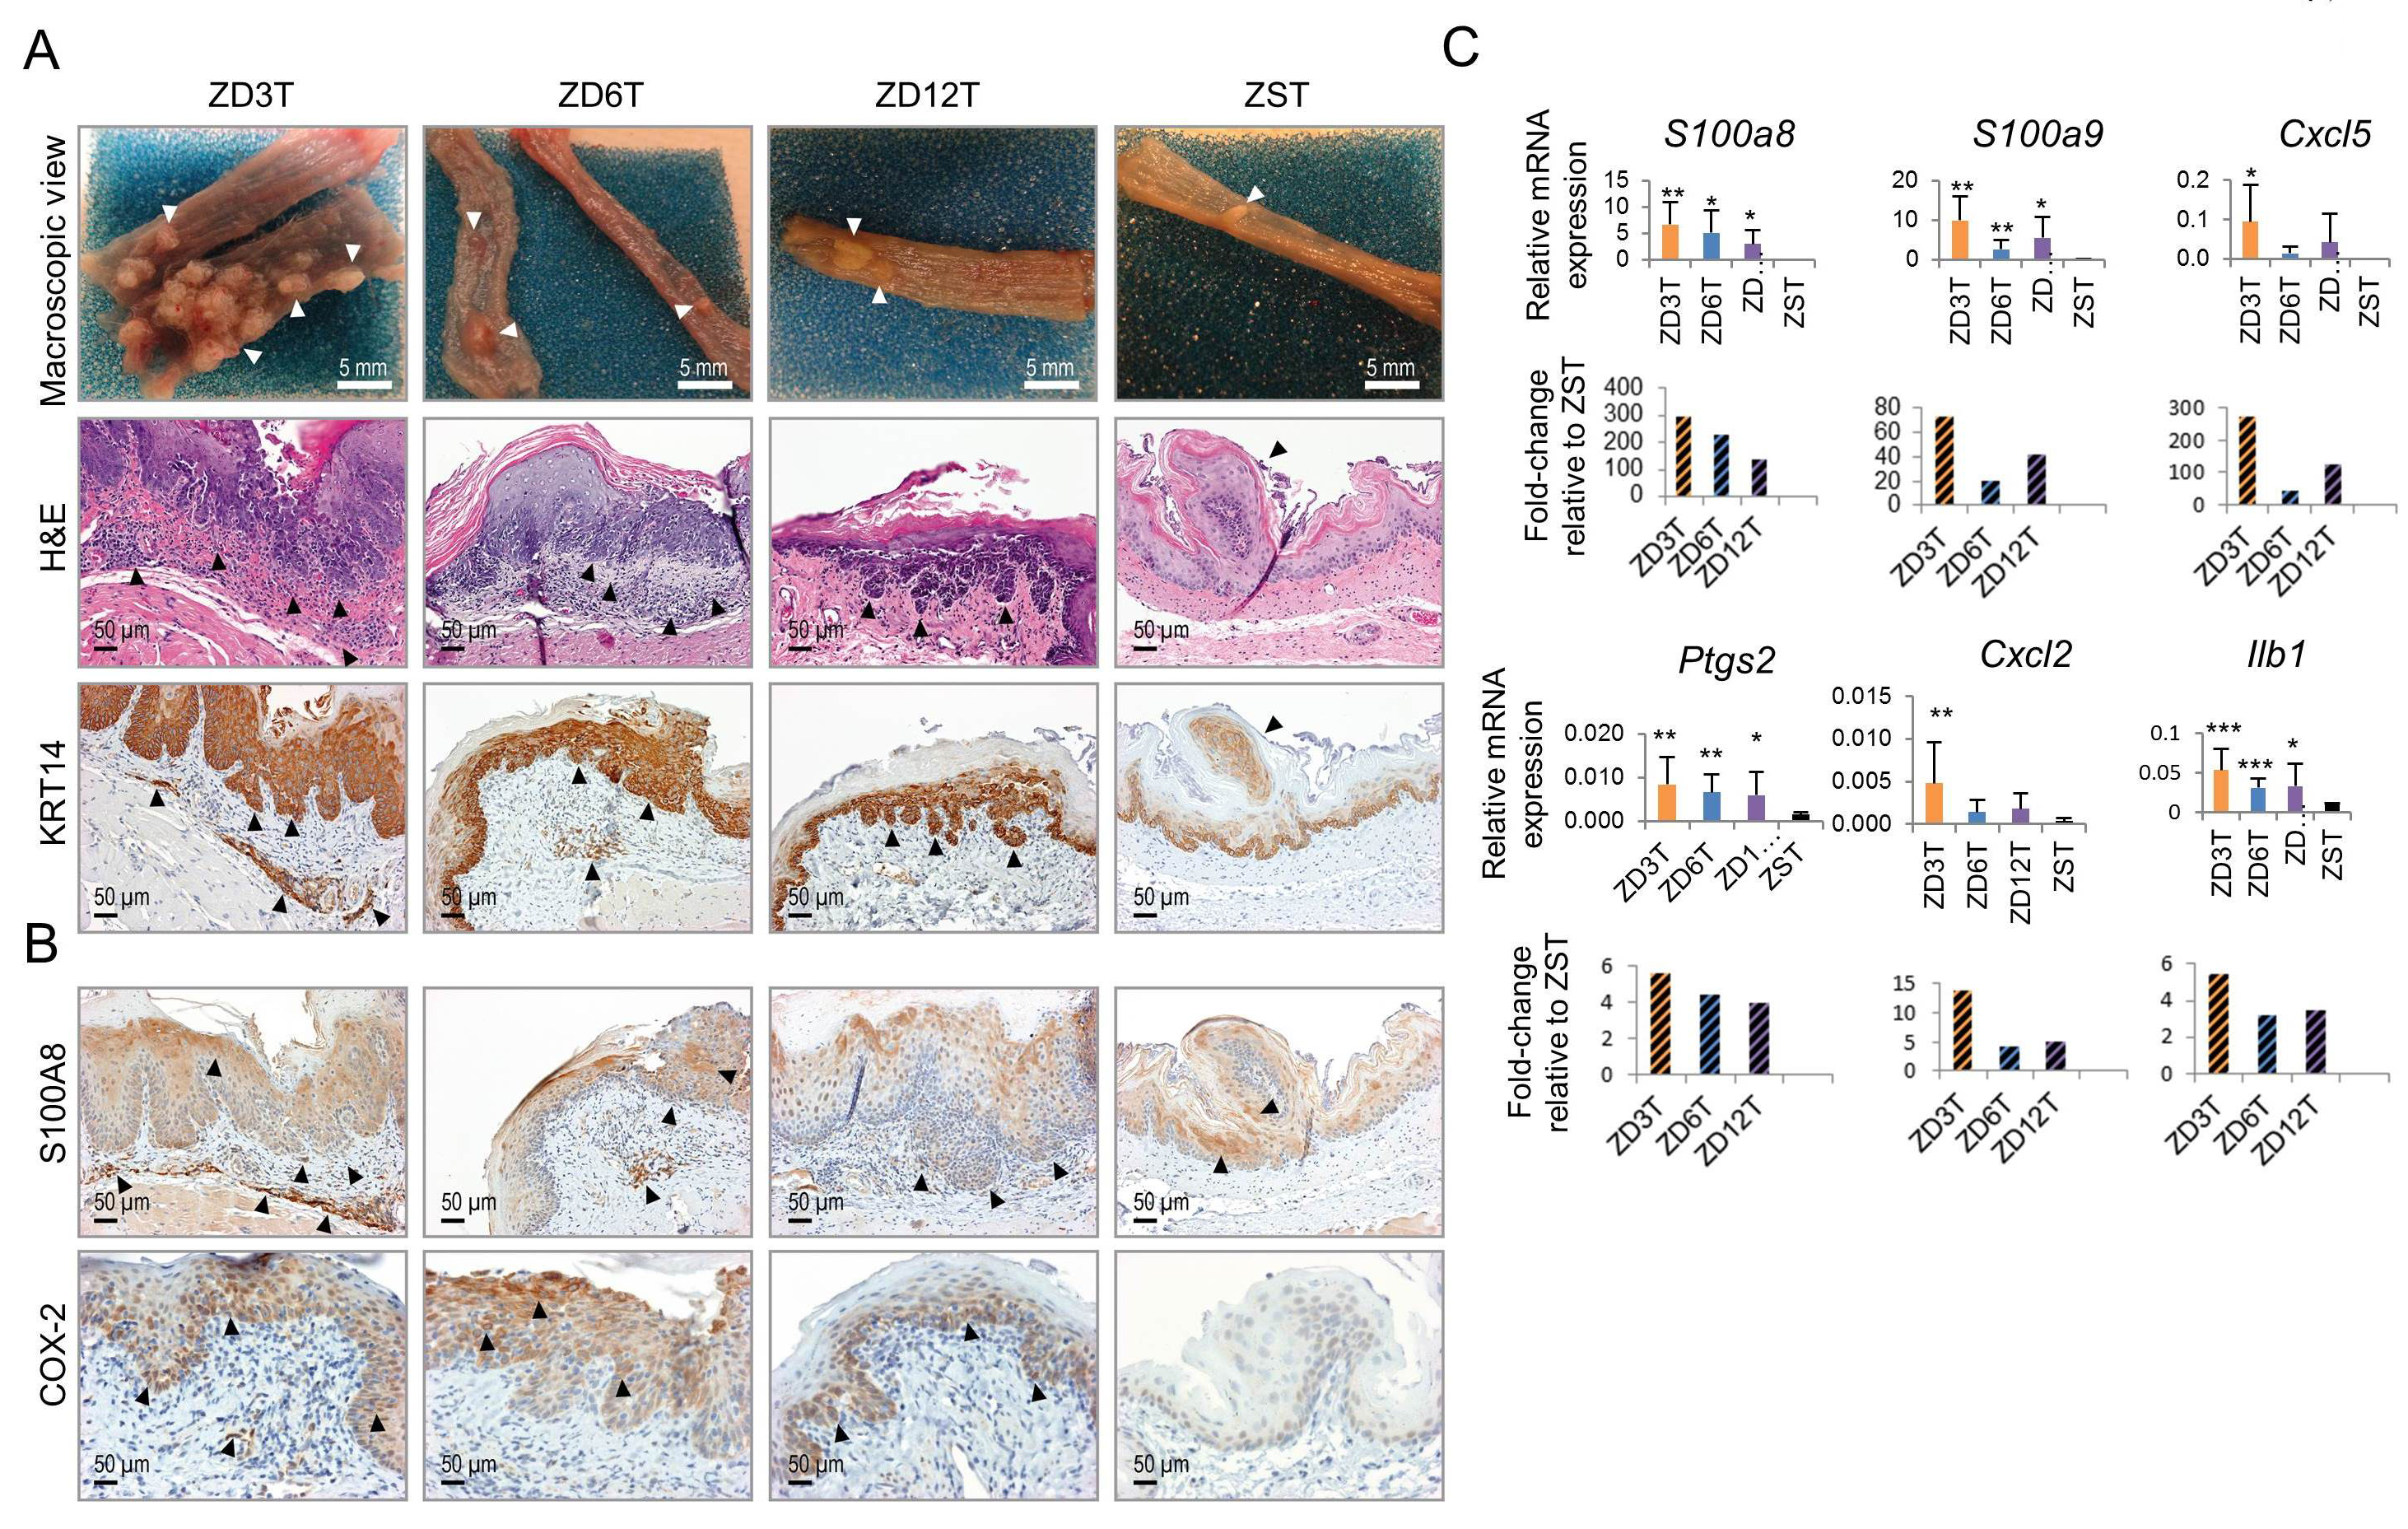 Esophageal tumor development in marked-ZD, moderate-ZD, and mild-ZD rats.